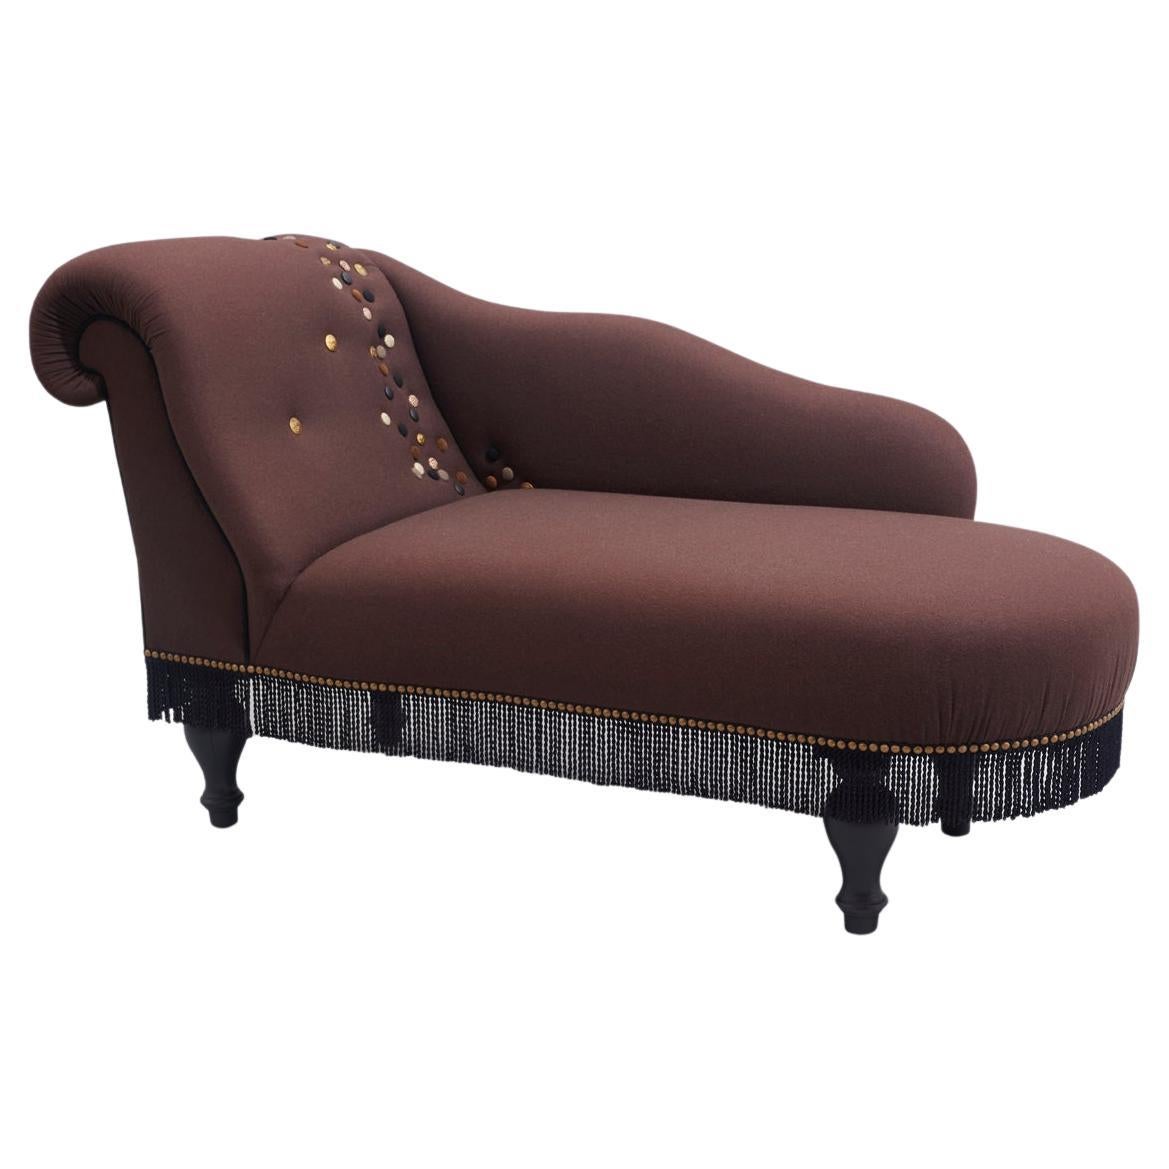 1920 Style Chaise Longues In Brown Wool Fabric And Brass Leather Button Detail For Sale